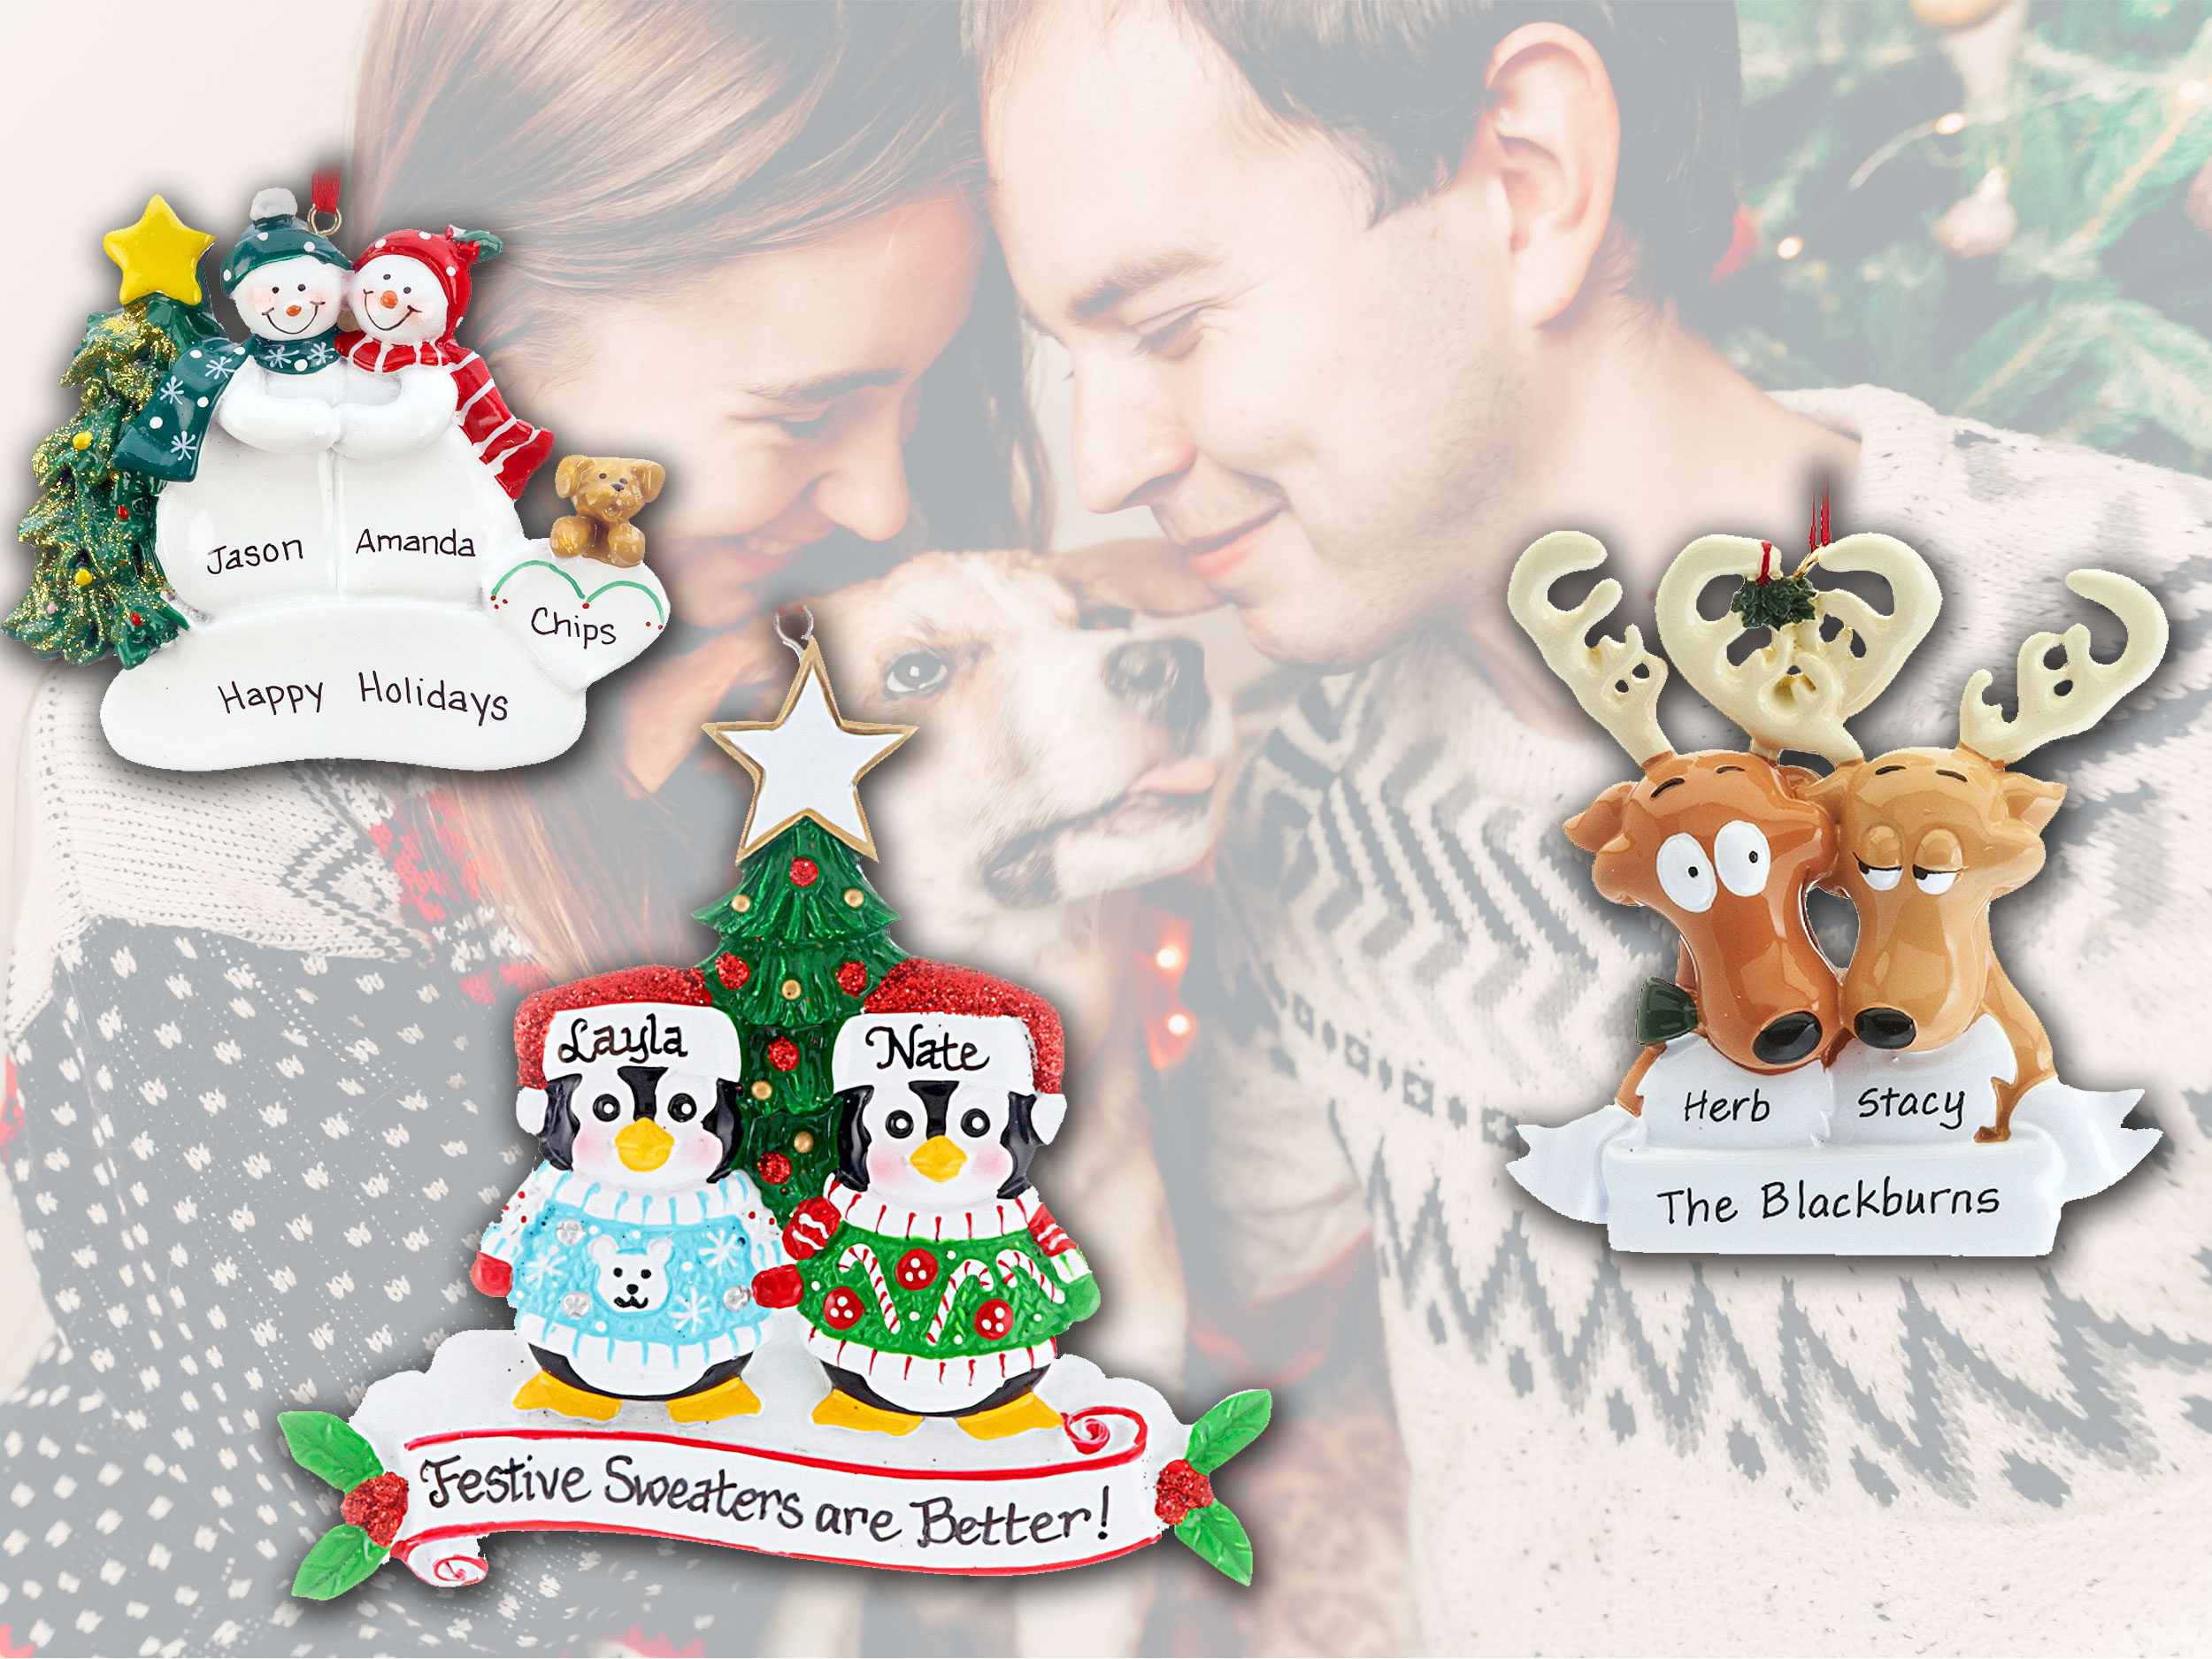 Three couples ornaments while a couple hugs their dog - penguins couple ornament, reindeer couple ornament and two snowman ornament. | OrnamentShop.com